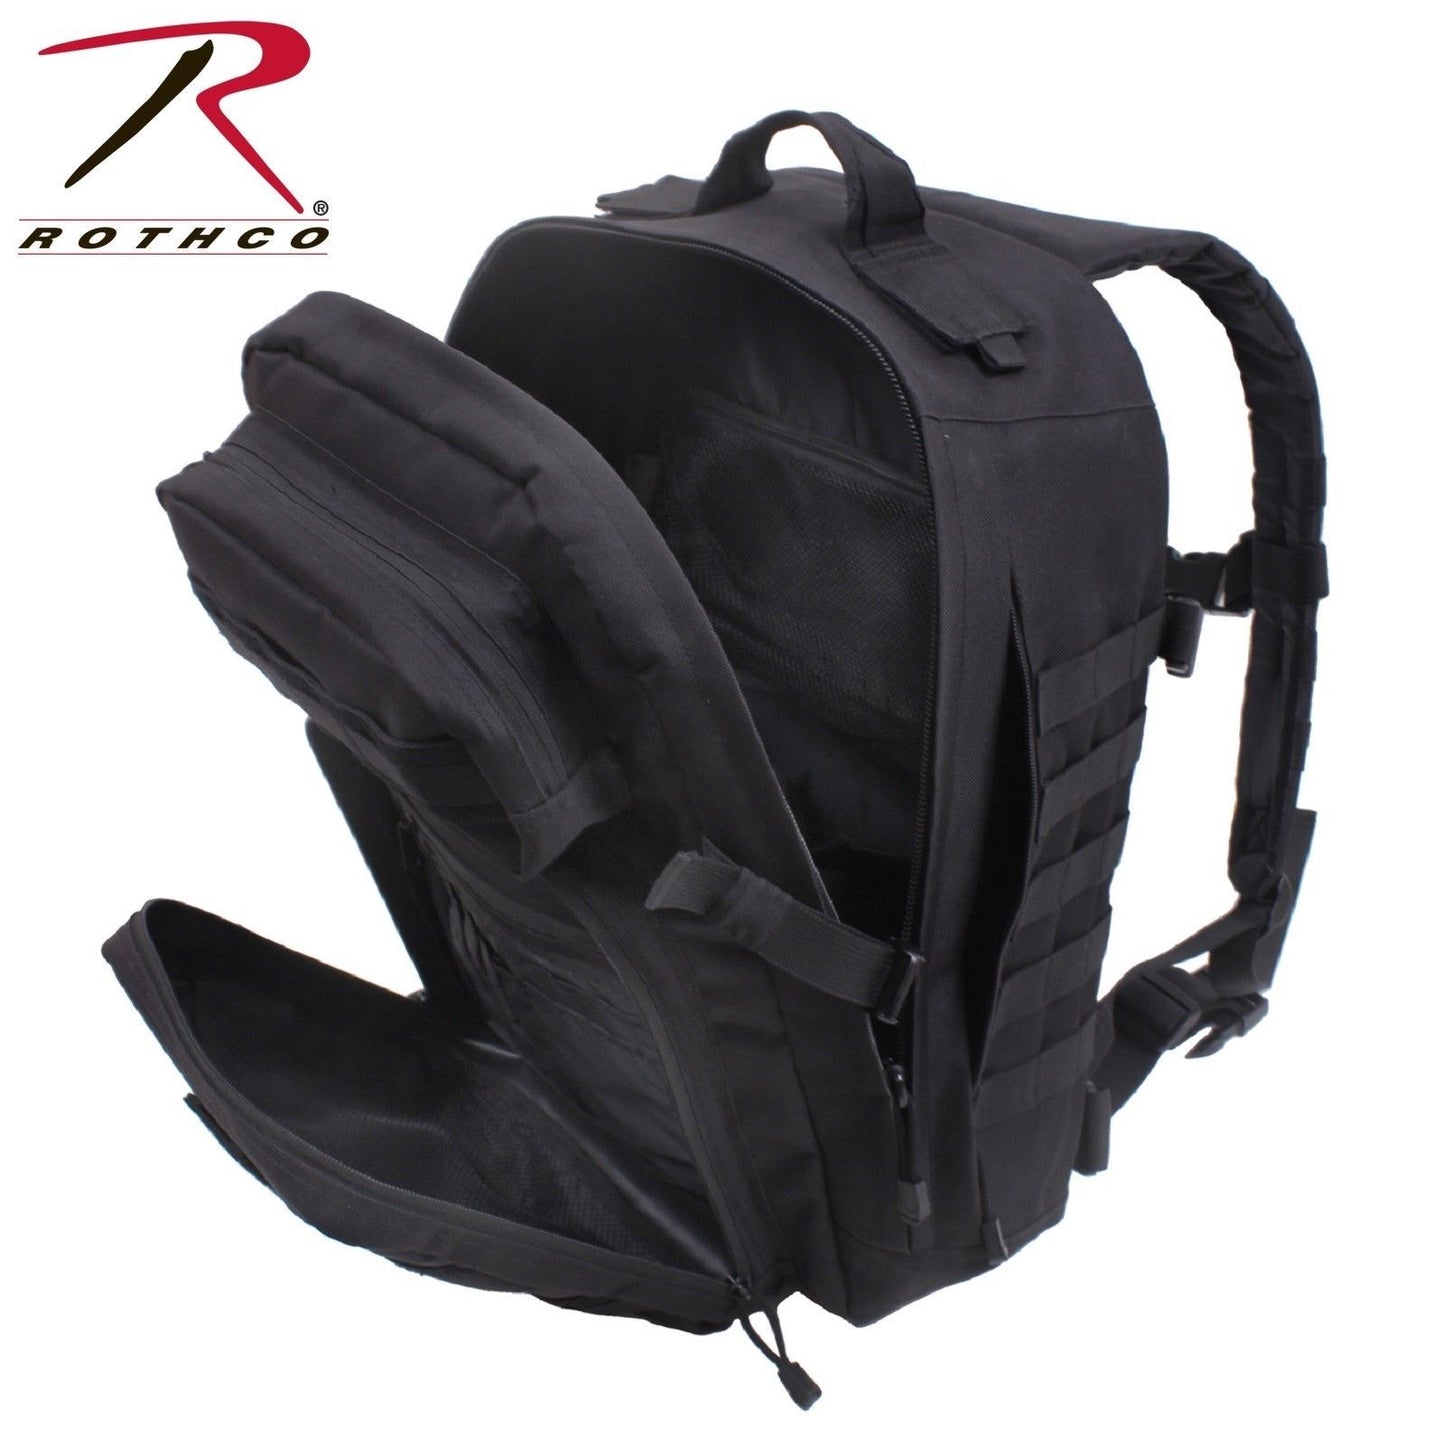 Rothco Fast Mover Tactical Backpack - Black Tactical MOLLE Compatible Gear Bag